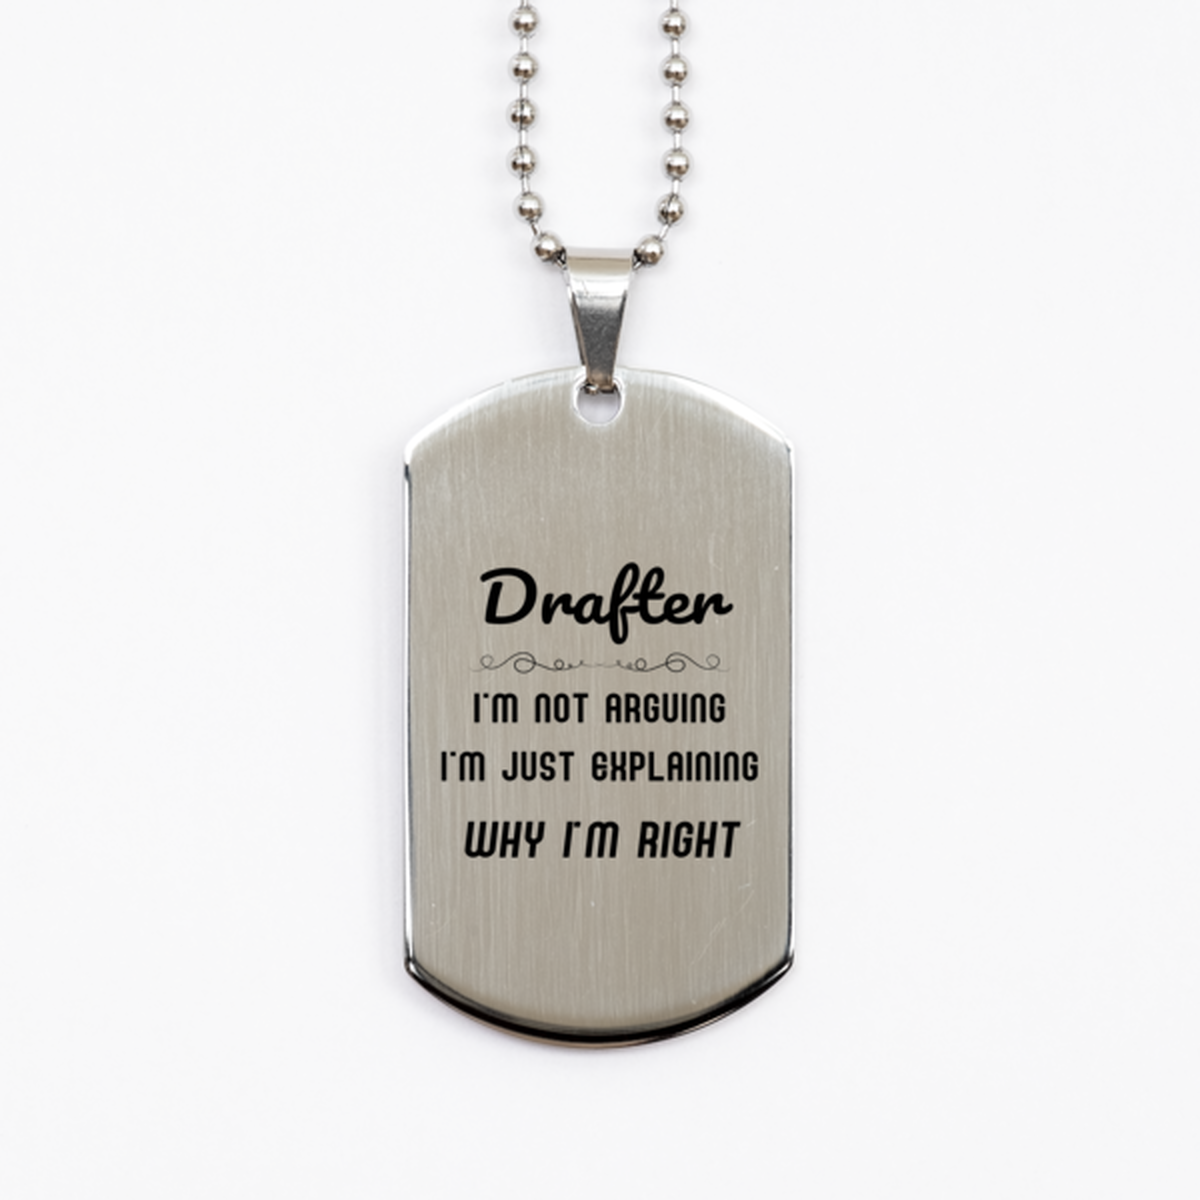 Drafter I'm not Arguing. I'm Just Explaining Why I'm RIGHT Silver Dog Tag, Funny Saying Quote Drafter Gifts For Drafter Graduation Birthday Christmas Gifts for Men Women Coworker